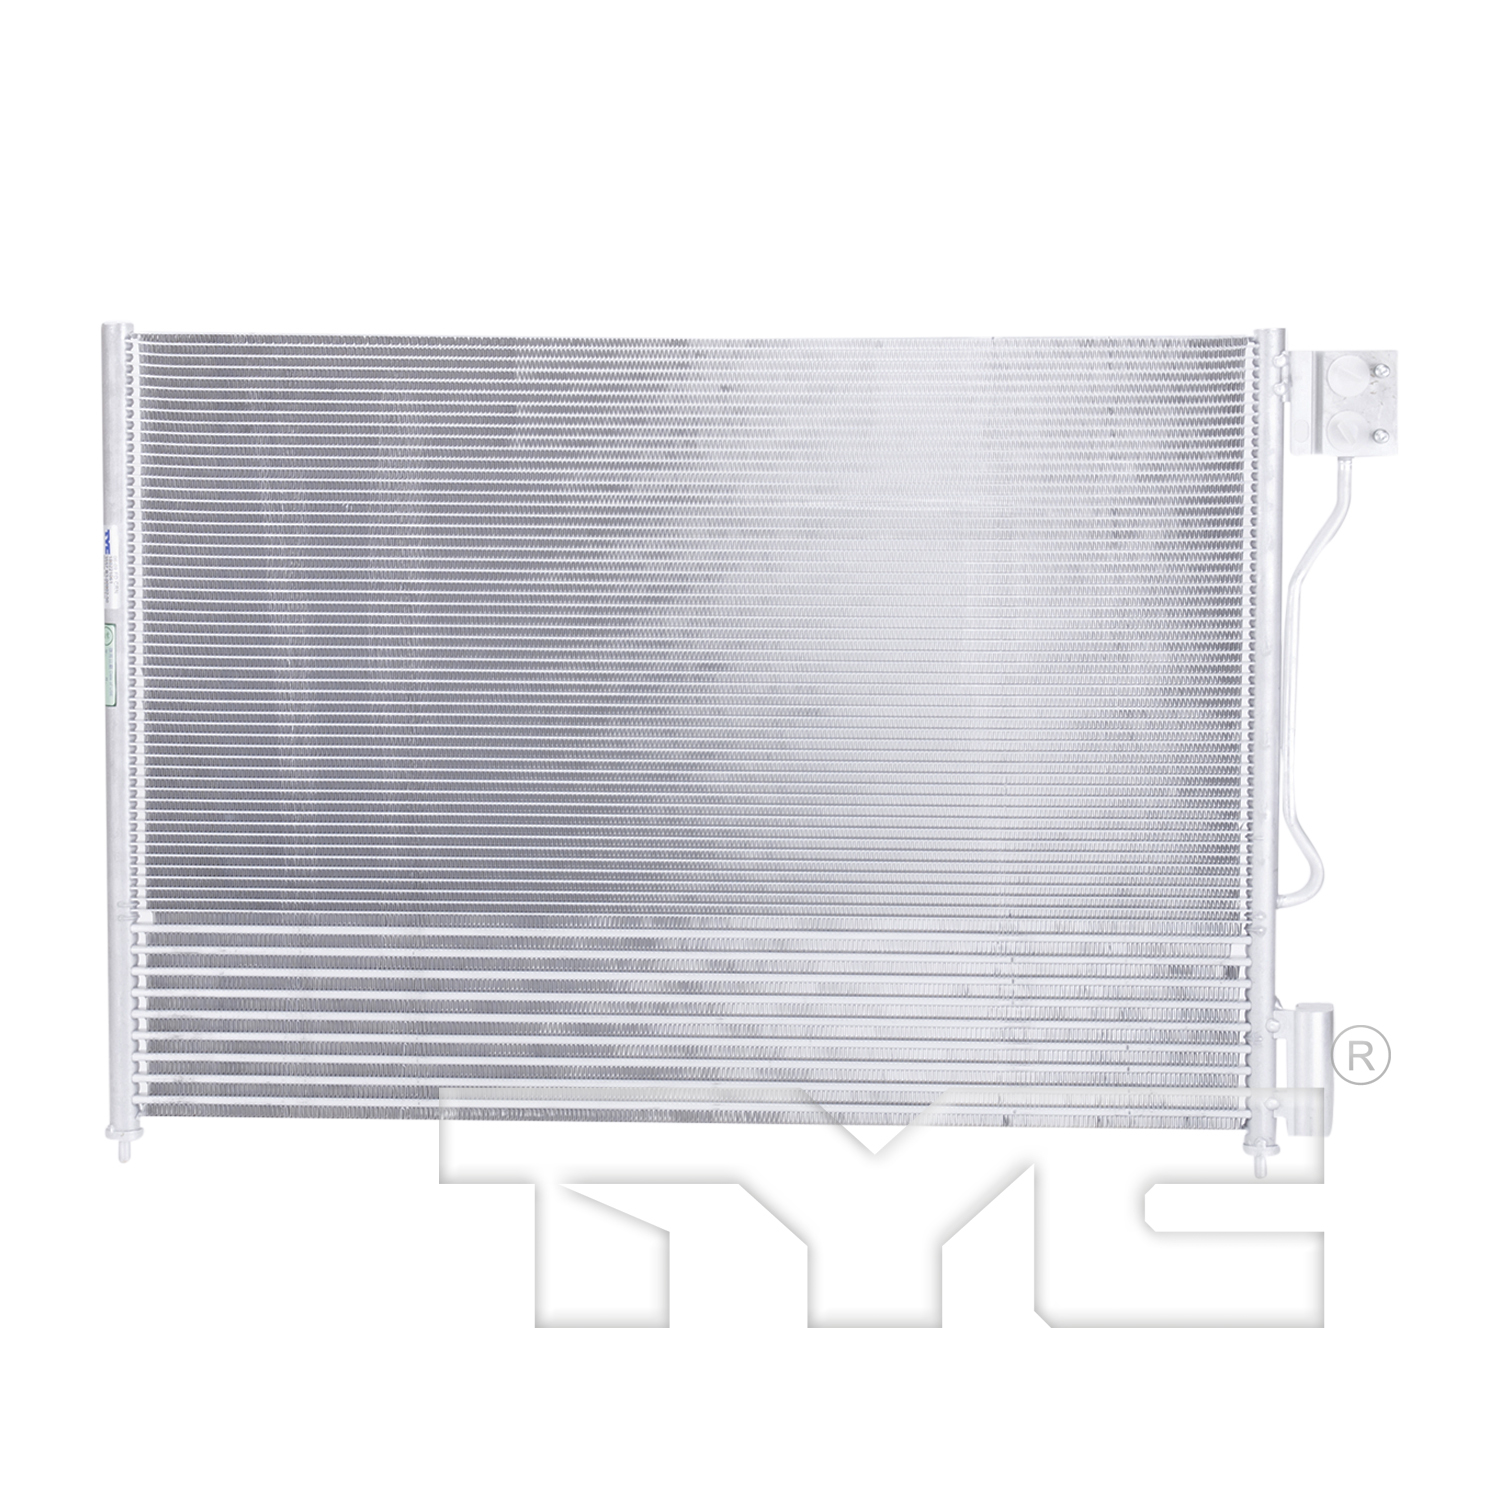 Aftermarket AC CONDENSERS for LINCOLN - TOWN CAR, TOWN CAR,06-11,Air conditioning condenser